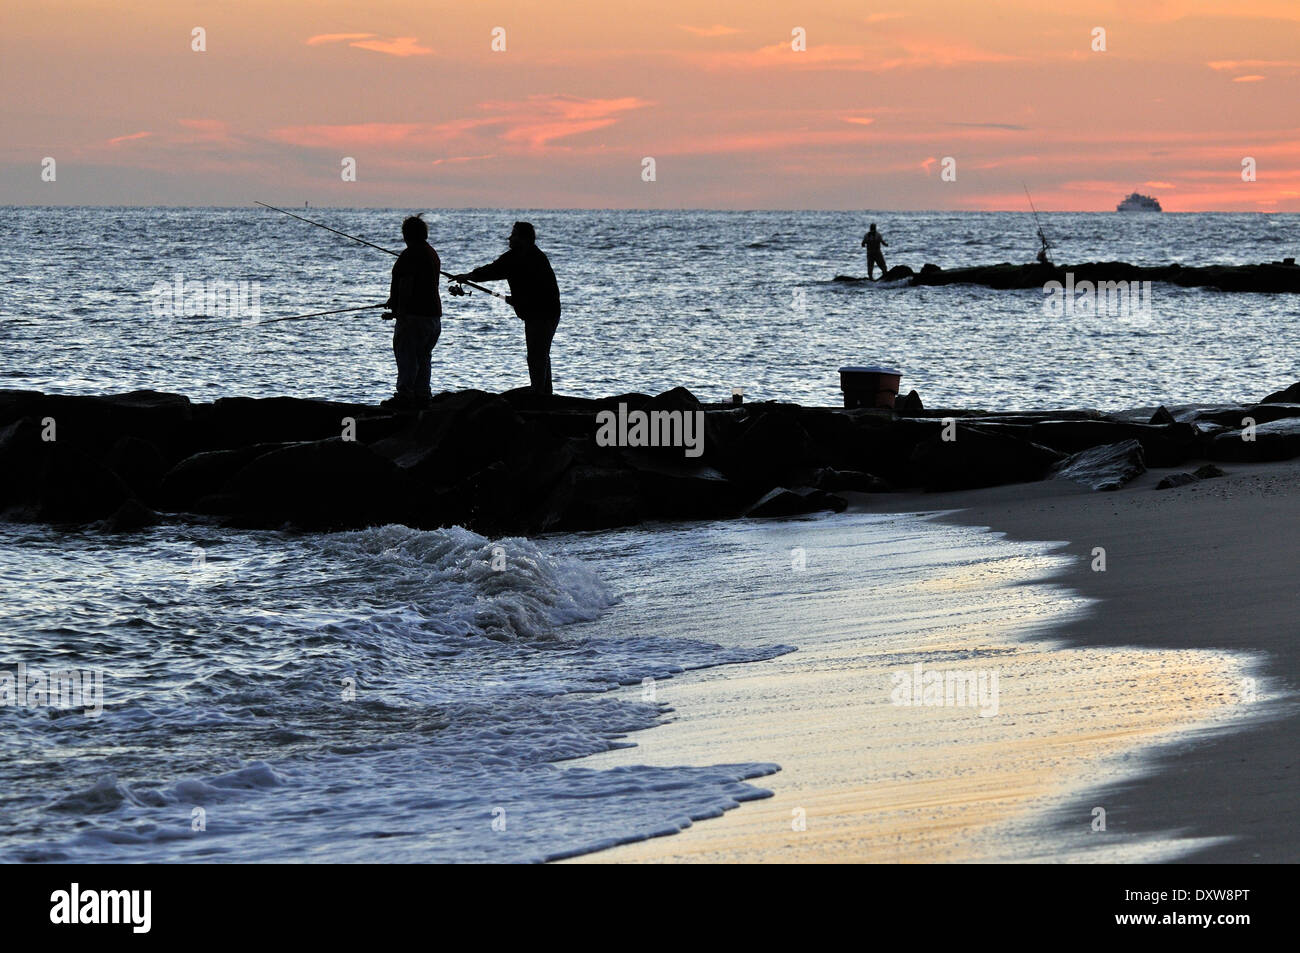 https://c8.alamy.com/comp/DXW8PT/men-fishing-off-the-beach-at-sunset-in-cape-may-nj-usa-DXW8PT.jpg